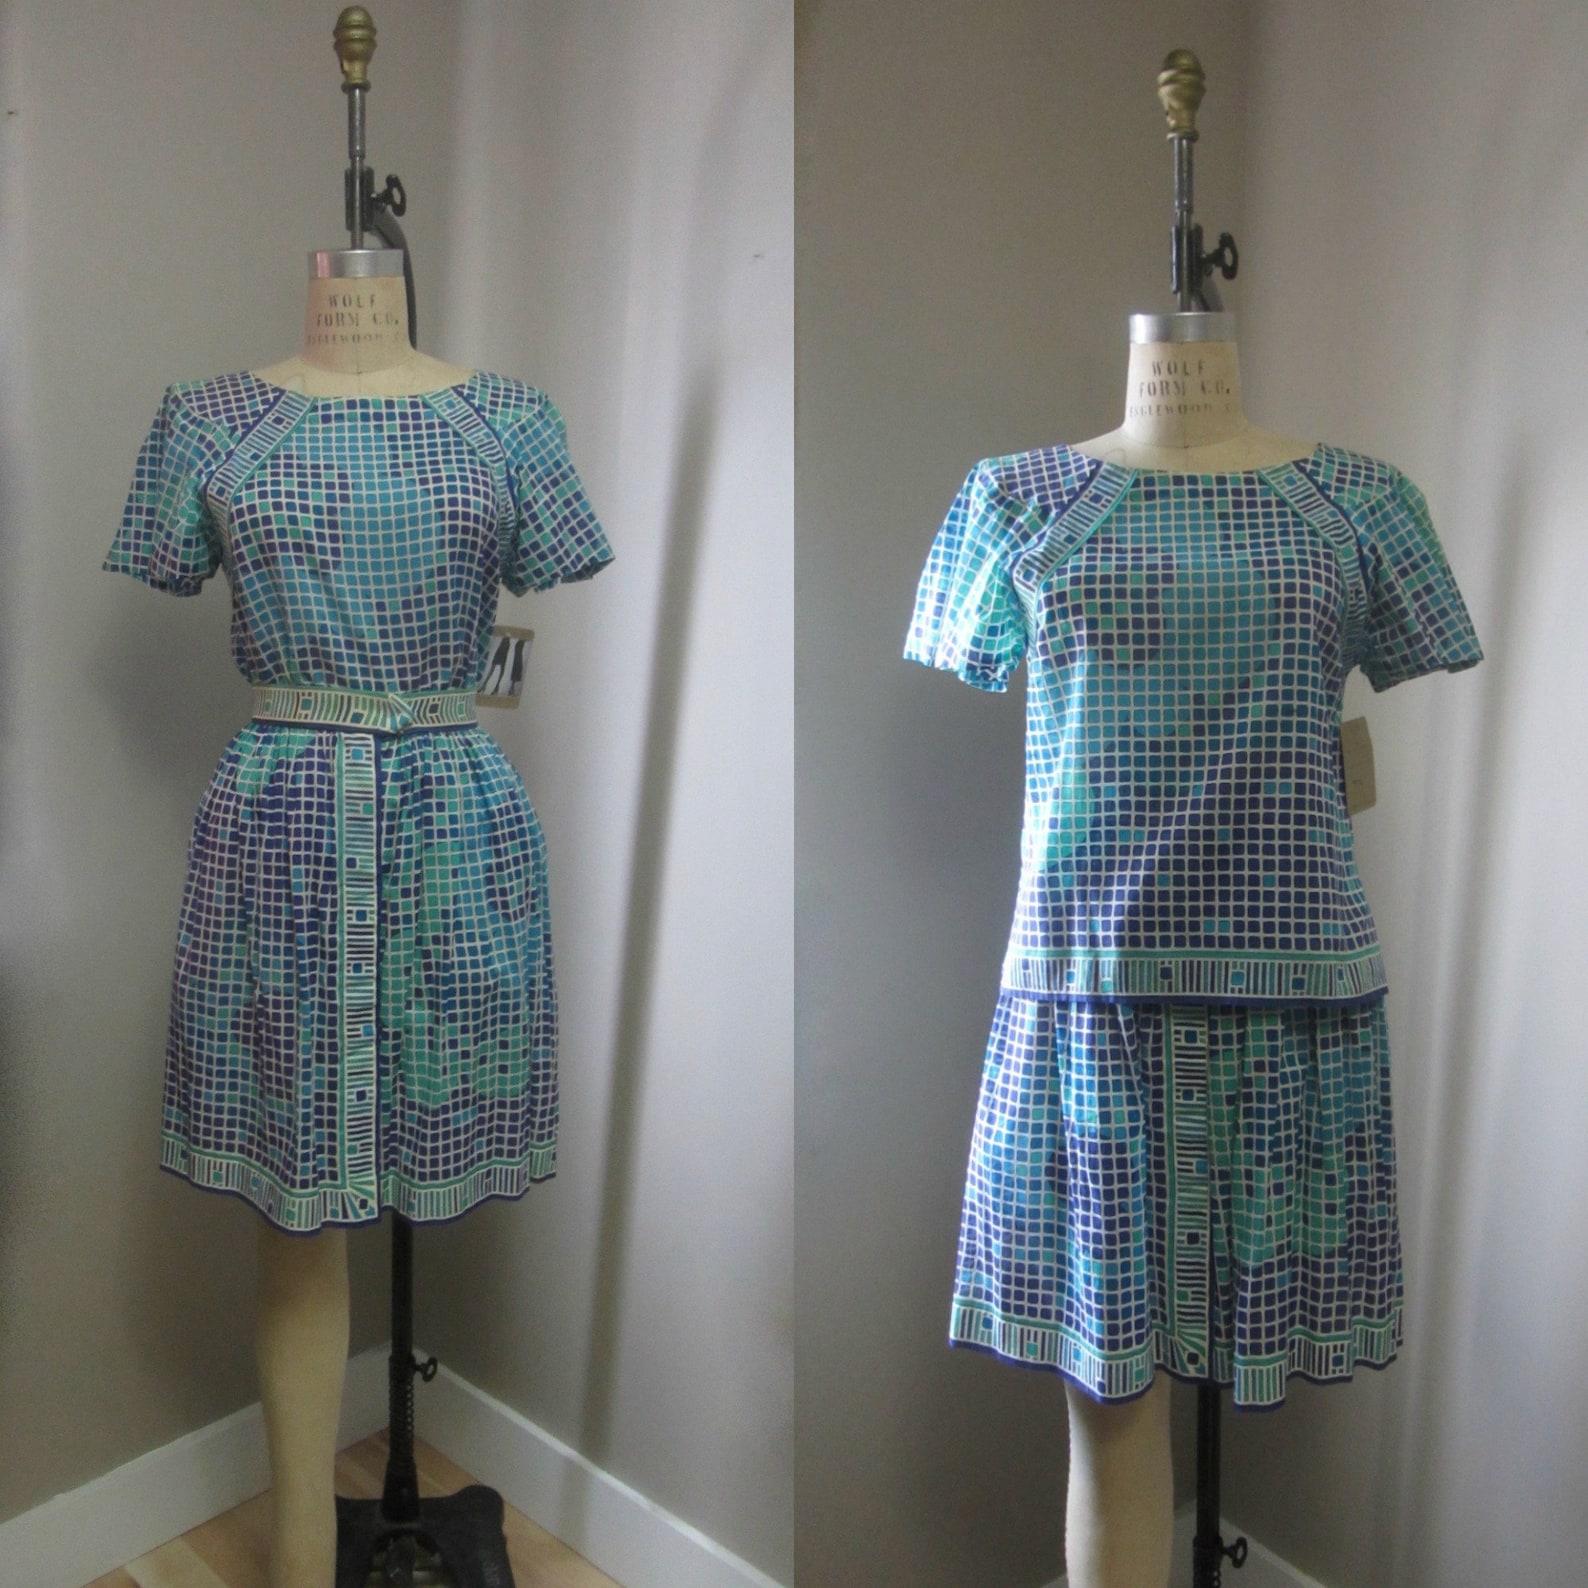 Vintage Emilio Pucci two piece blouse and skirt set. 
Geometric print in shades of blue, green, purple, and cream. 
Short flutter sleeve blouse with cropped body, side split hem & round collar. 
Full mini skirt with fitted waist, center kick pleats